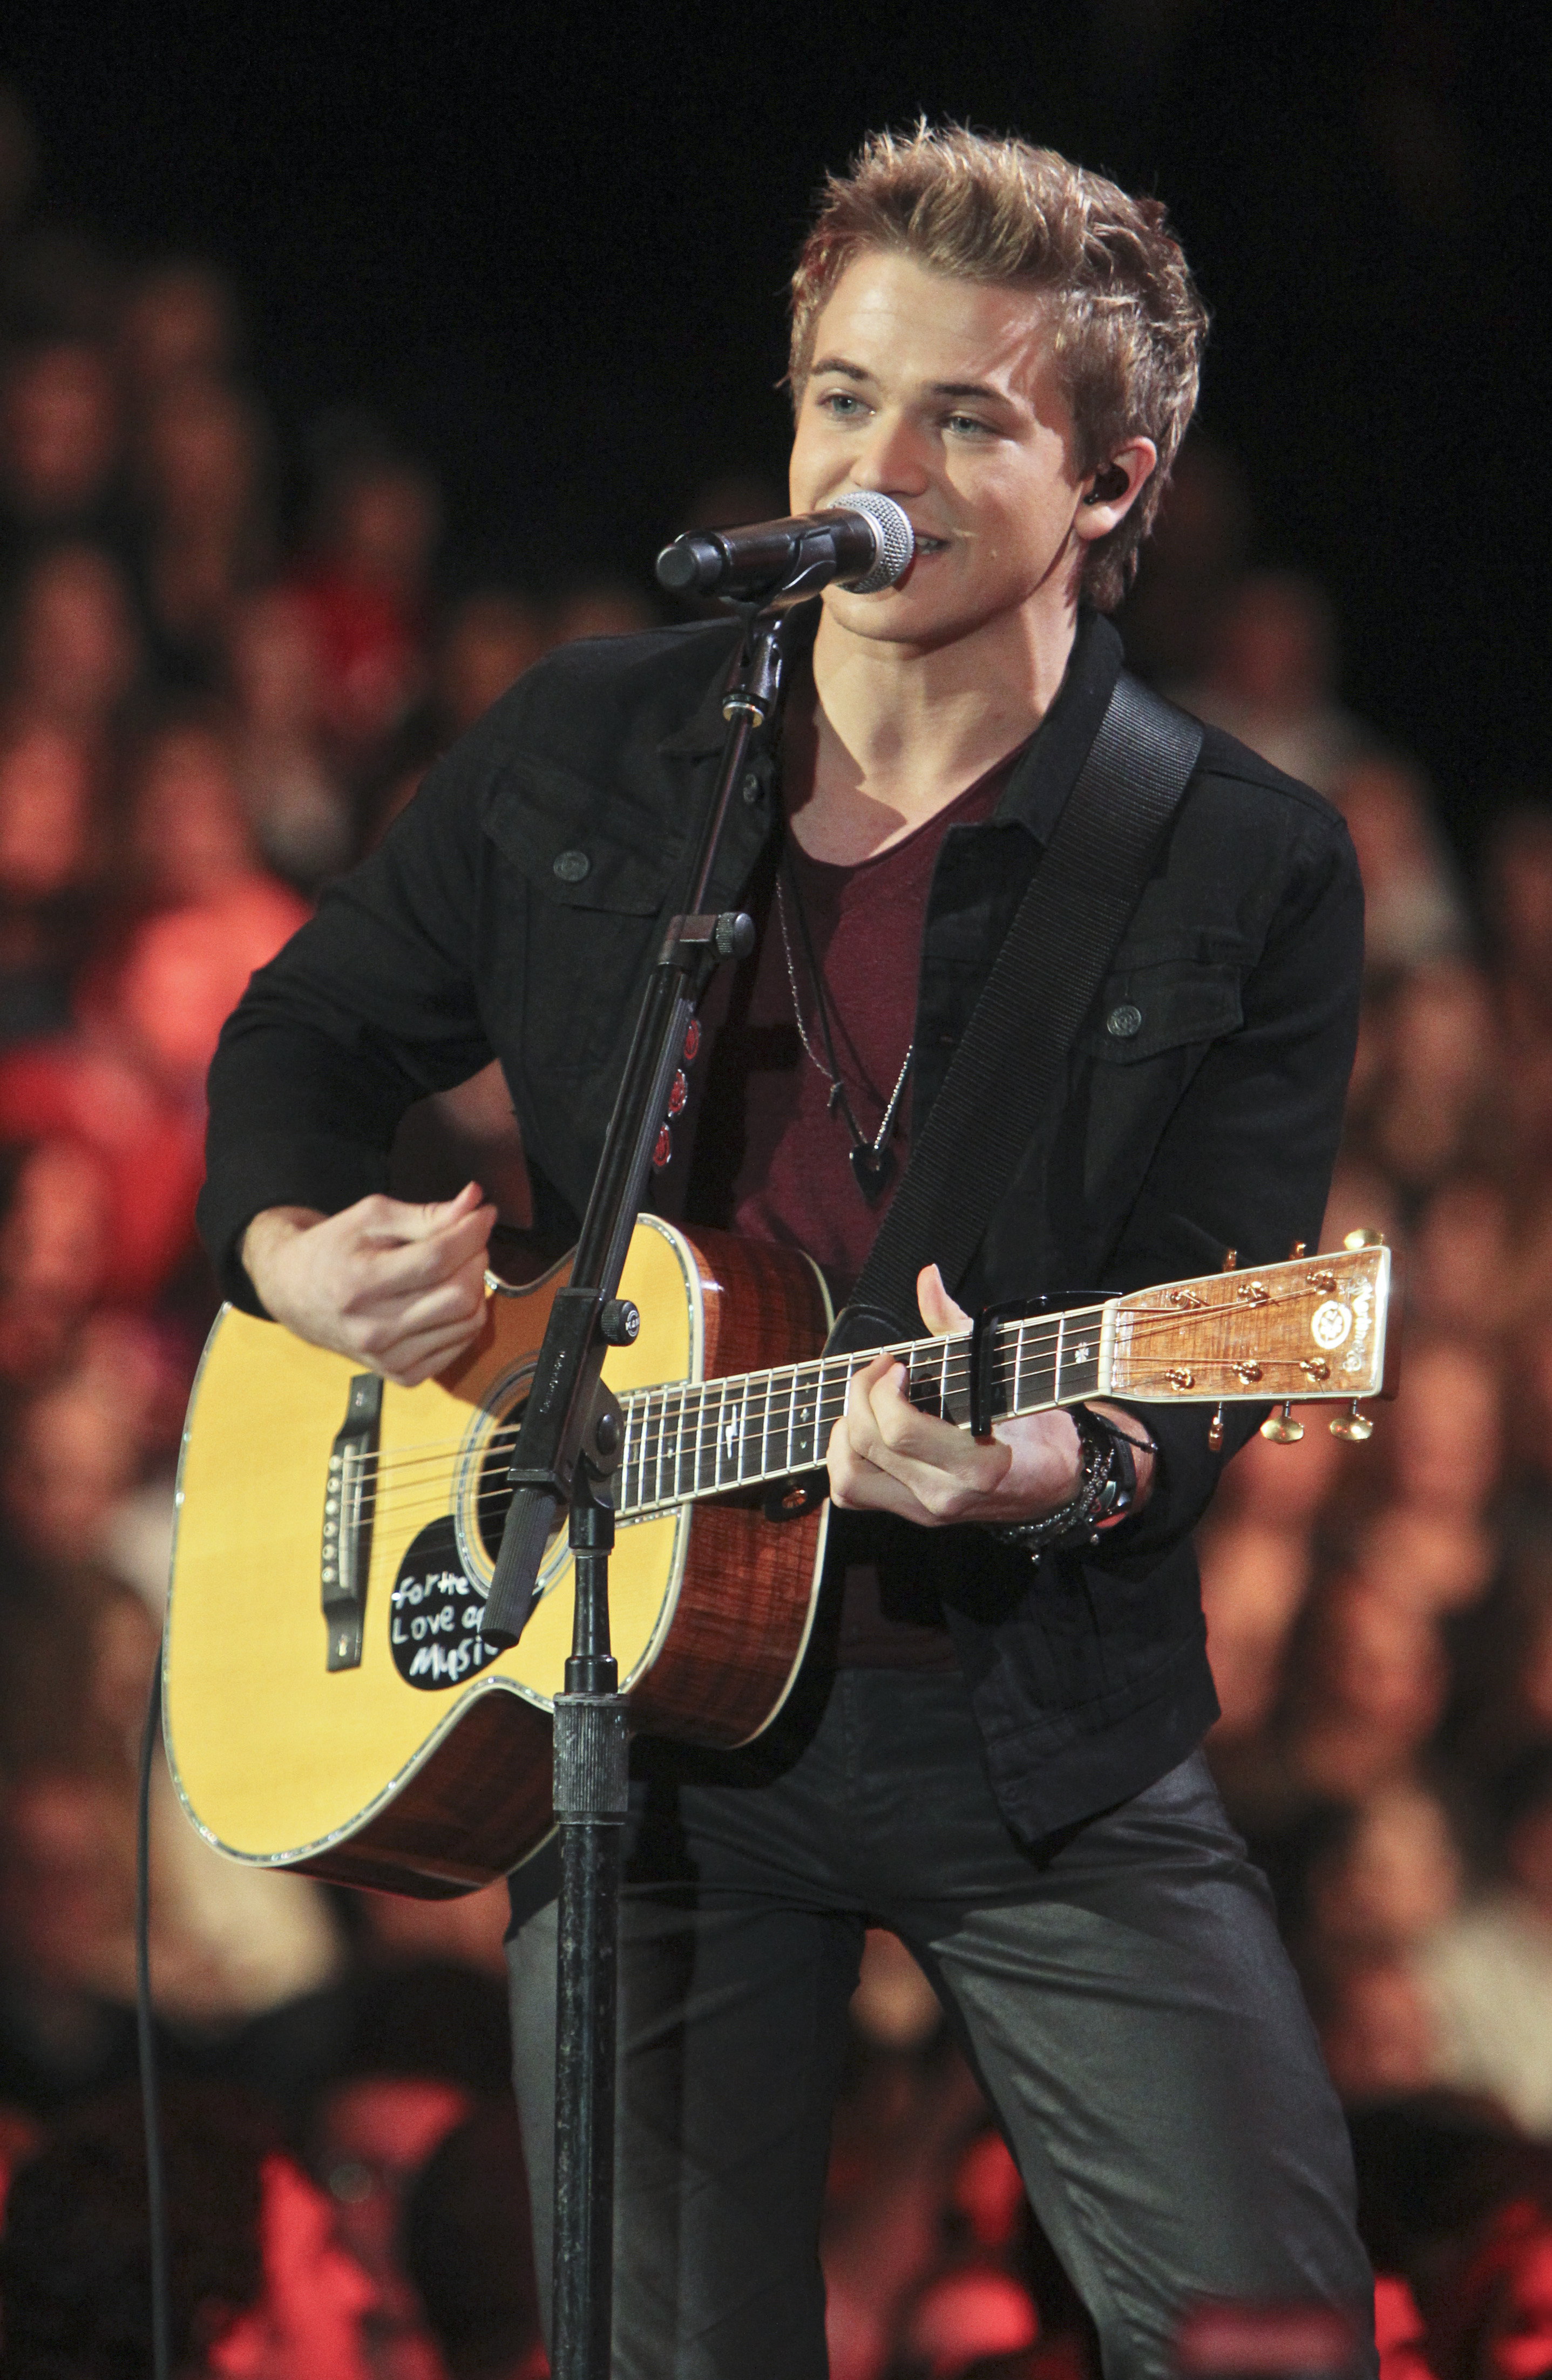 Hunter Hayes scheduled to perform on the 48th annual ACM Awards